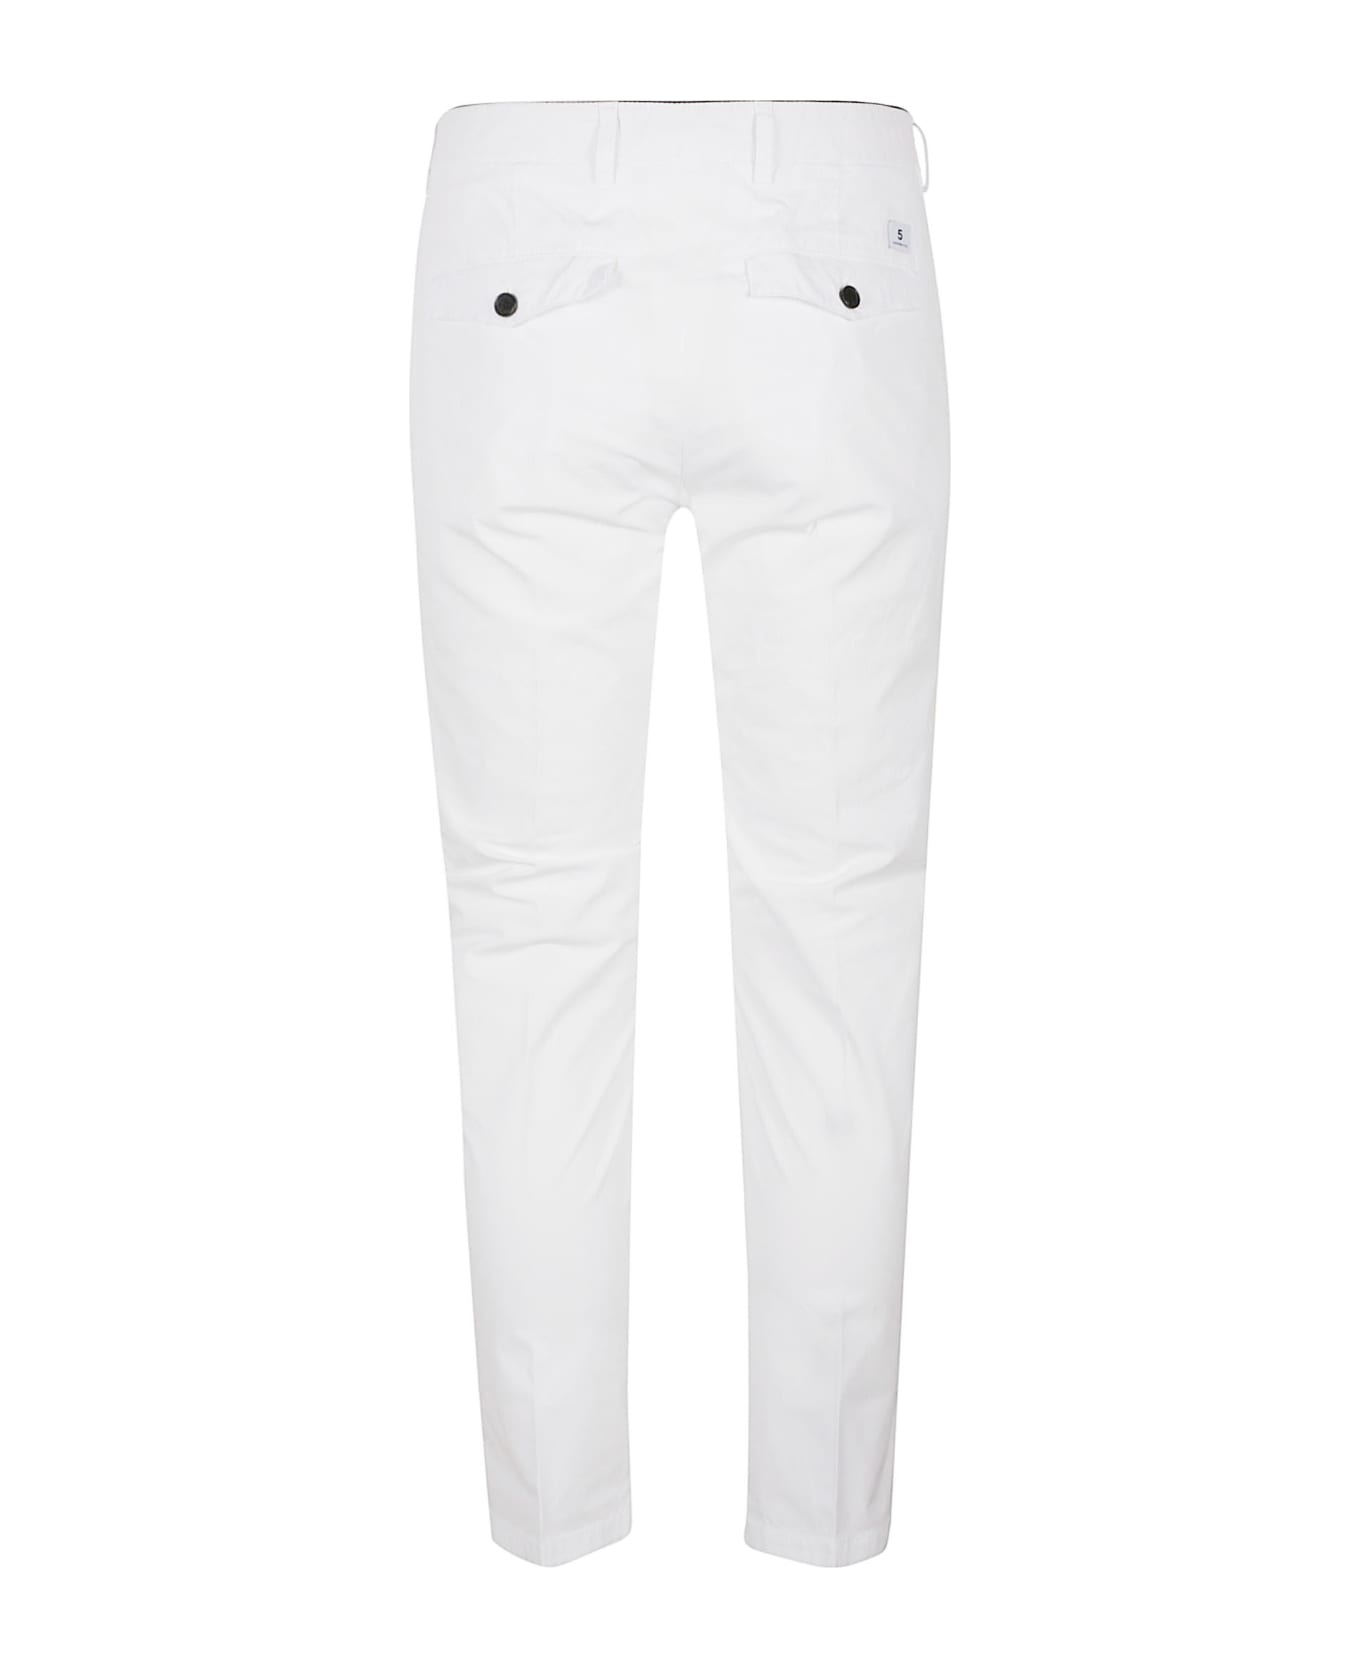 Department Five Prince Pences Chinos Pant - Bianco Ottico